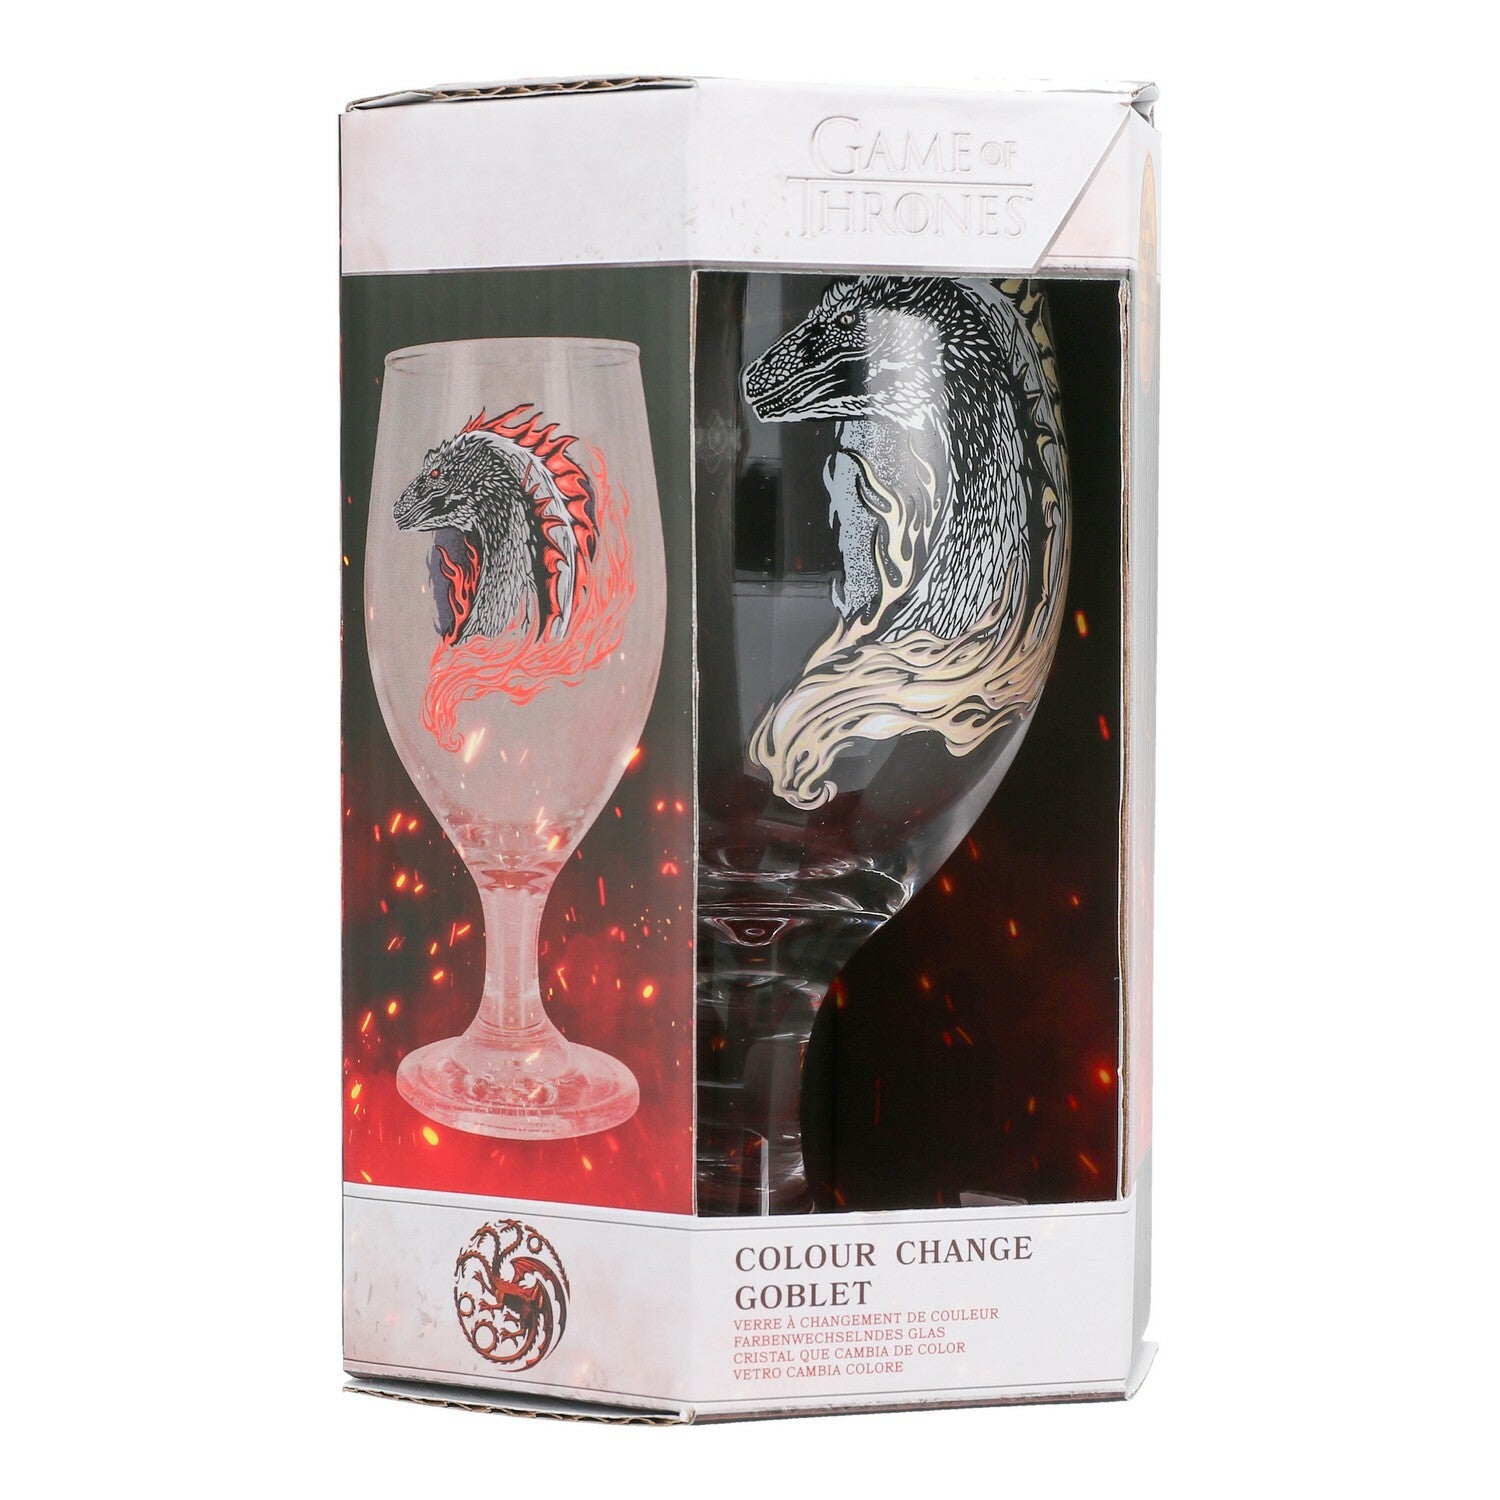  Game of Thrones: House of the Dragon - Colour Change Goblet  5056577713312